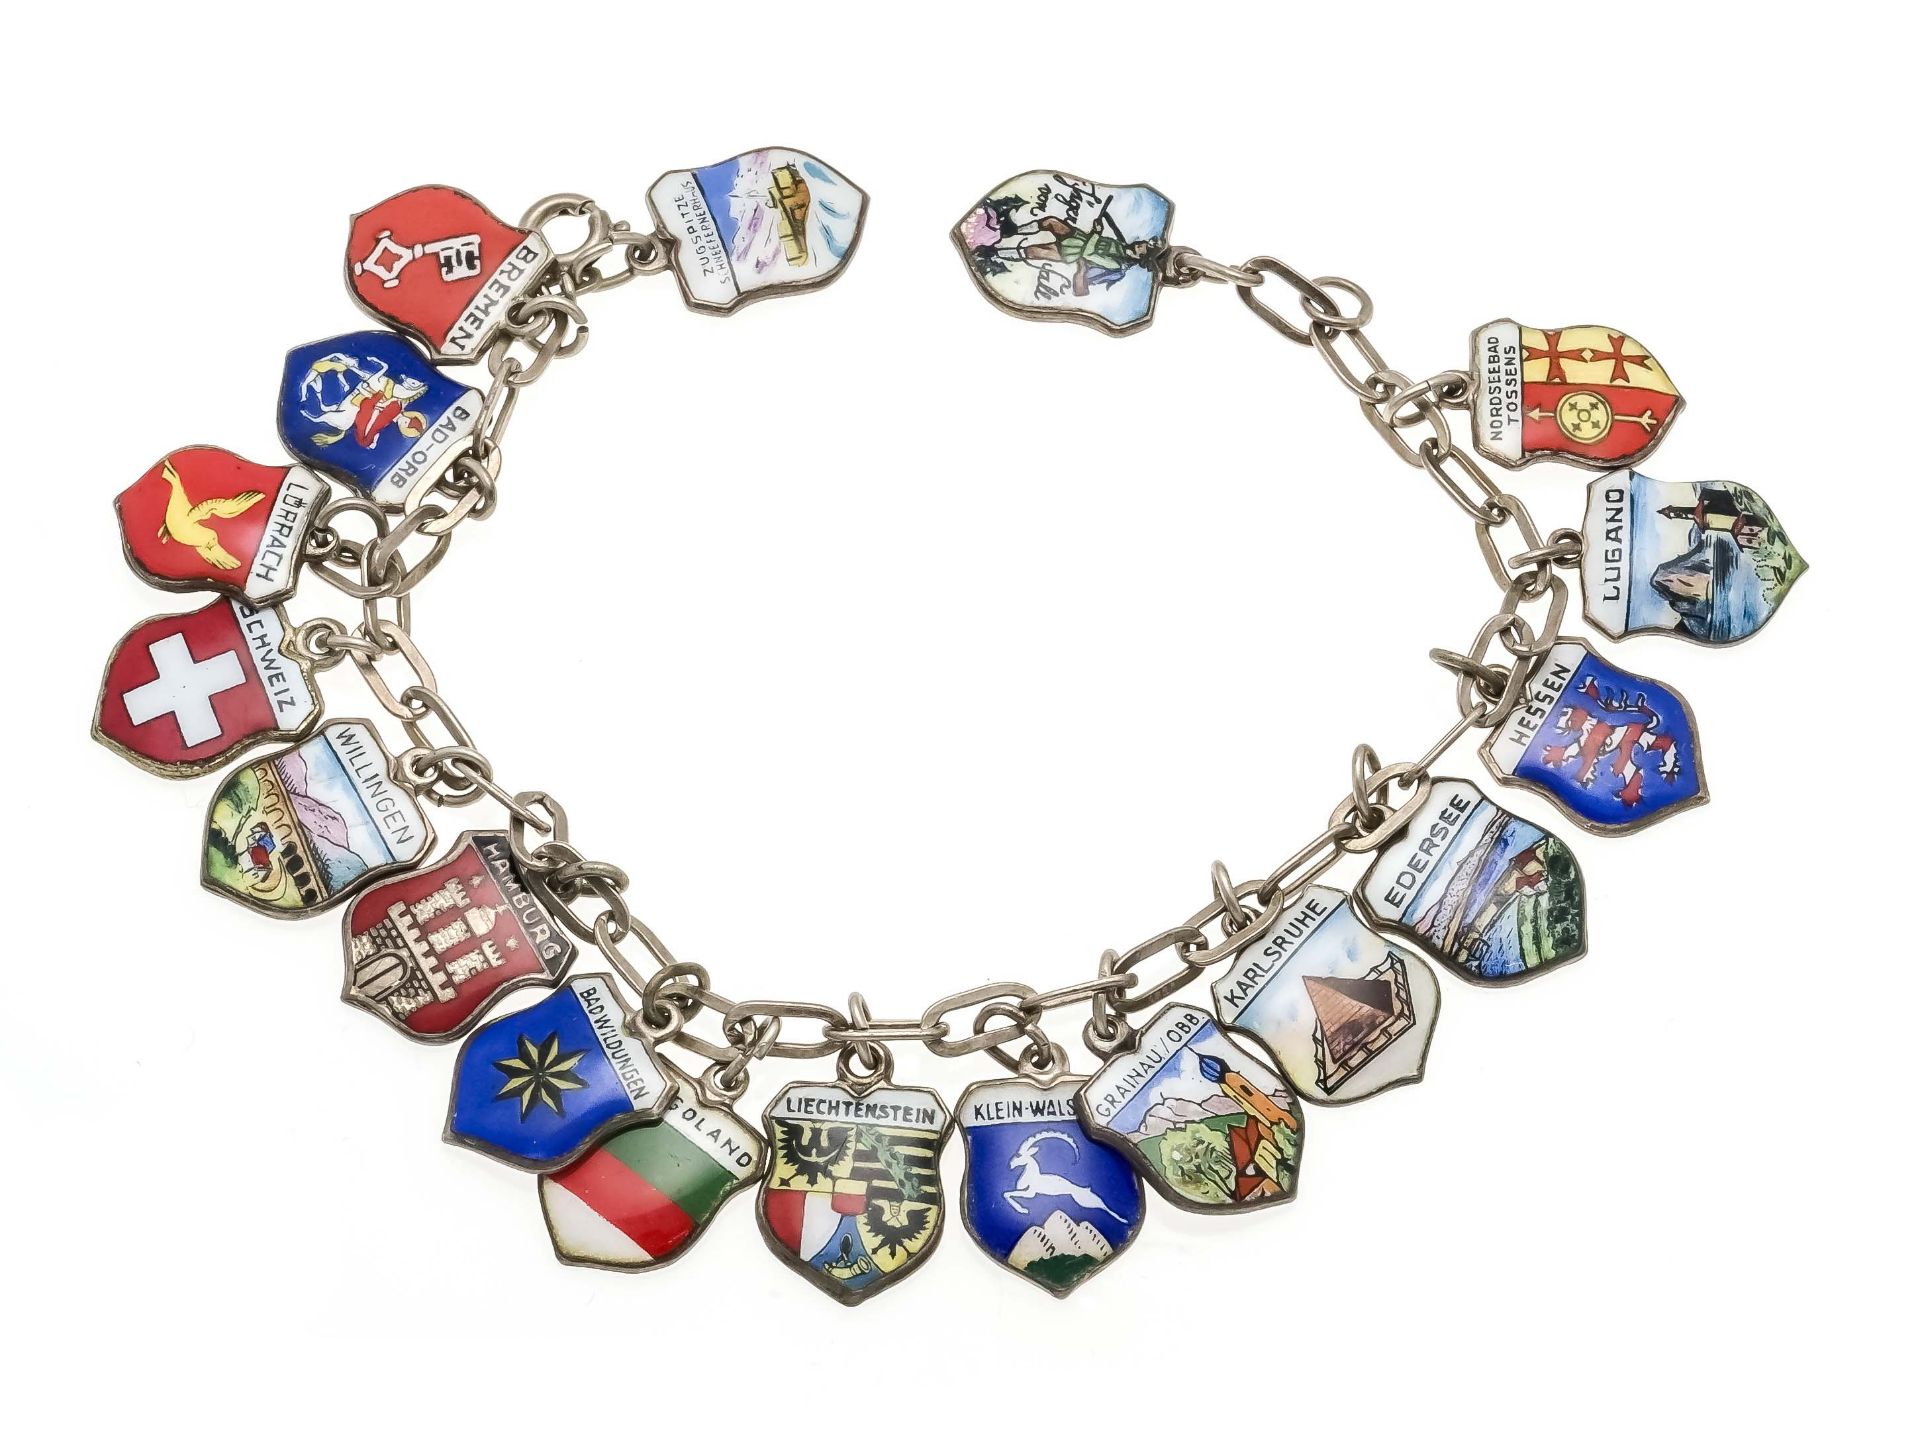 Silver charm bracelet with 18 coat of arms-shaped pendants of German and Swiss travel destinations